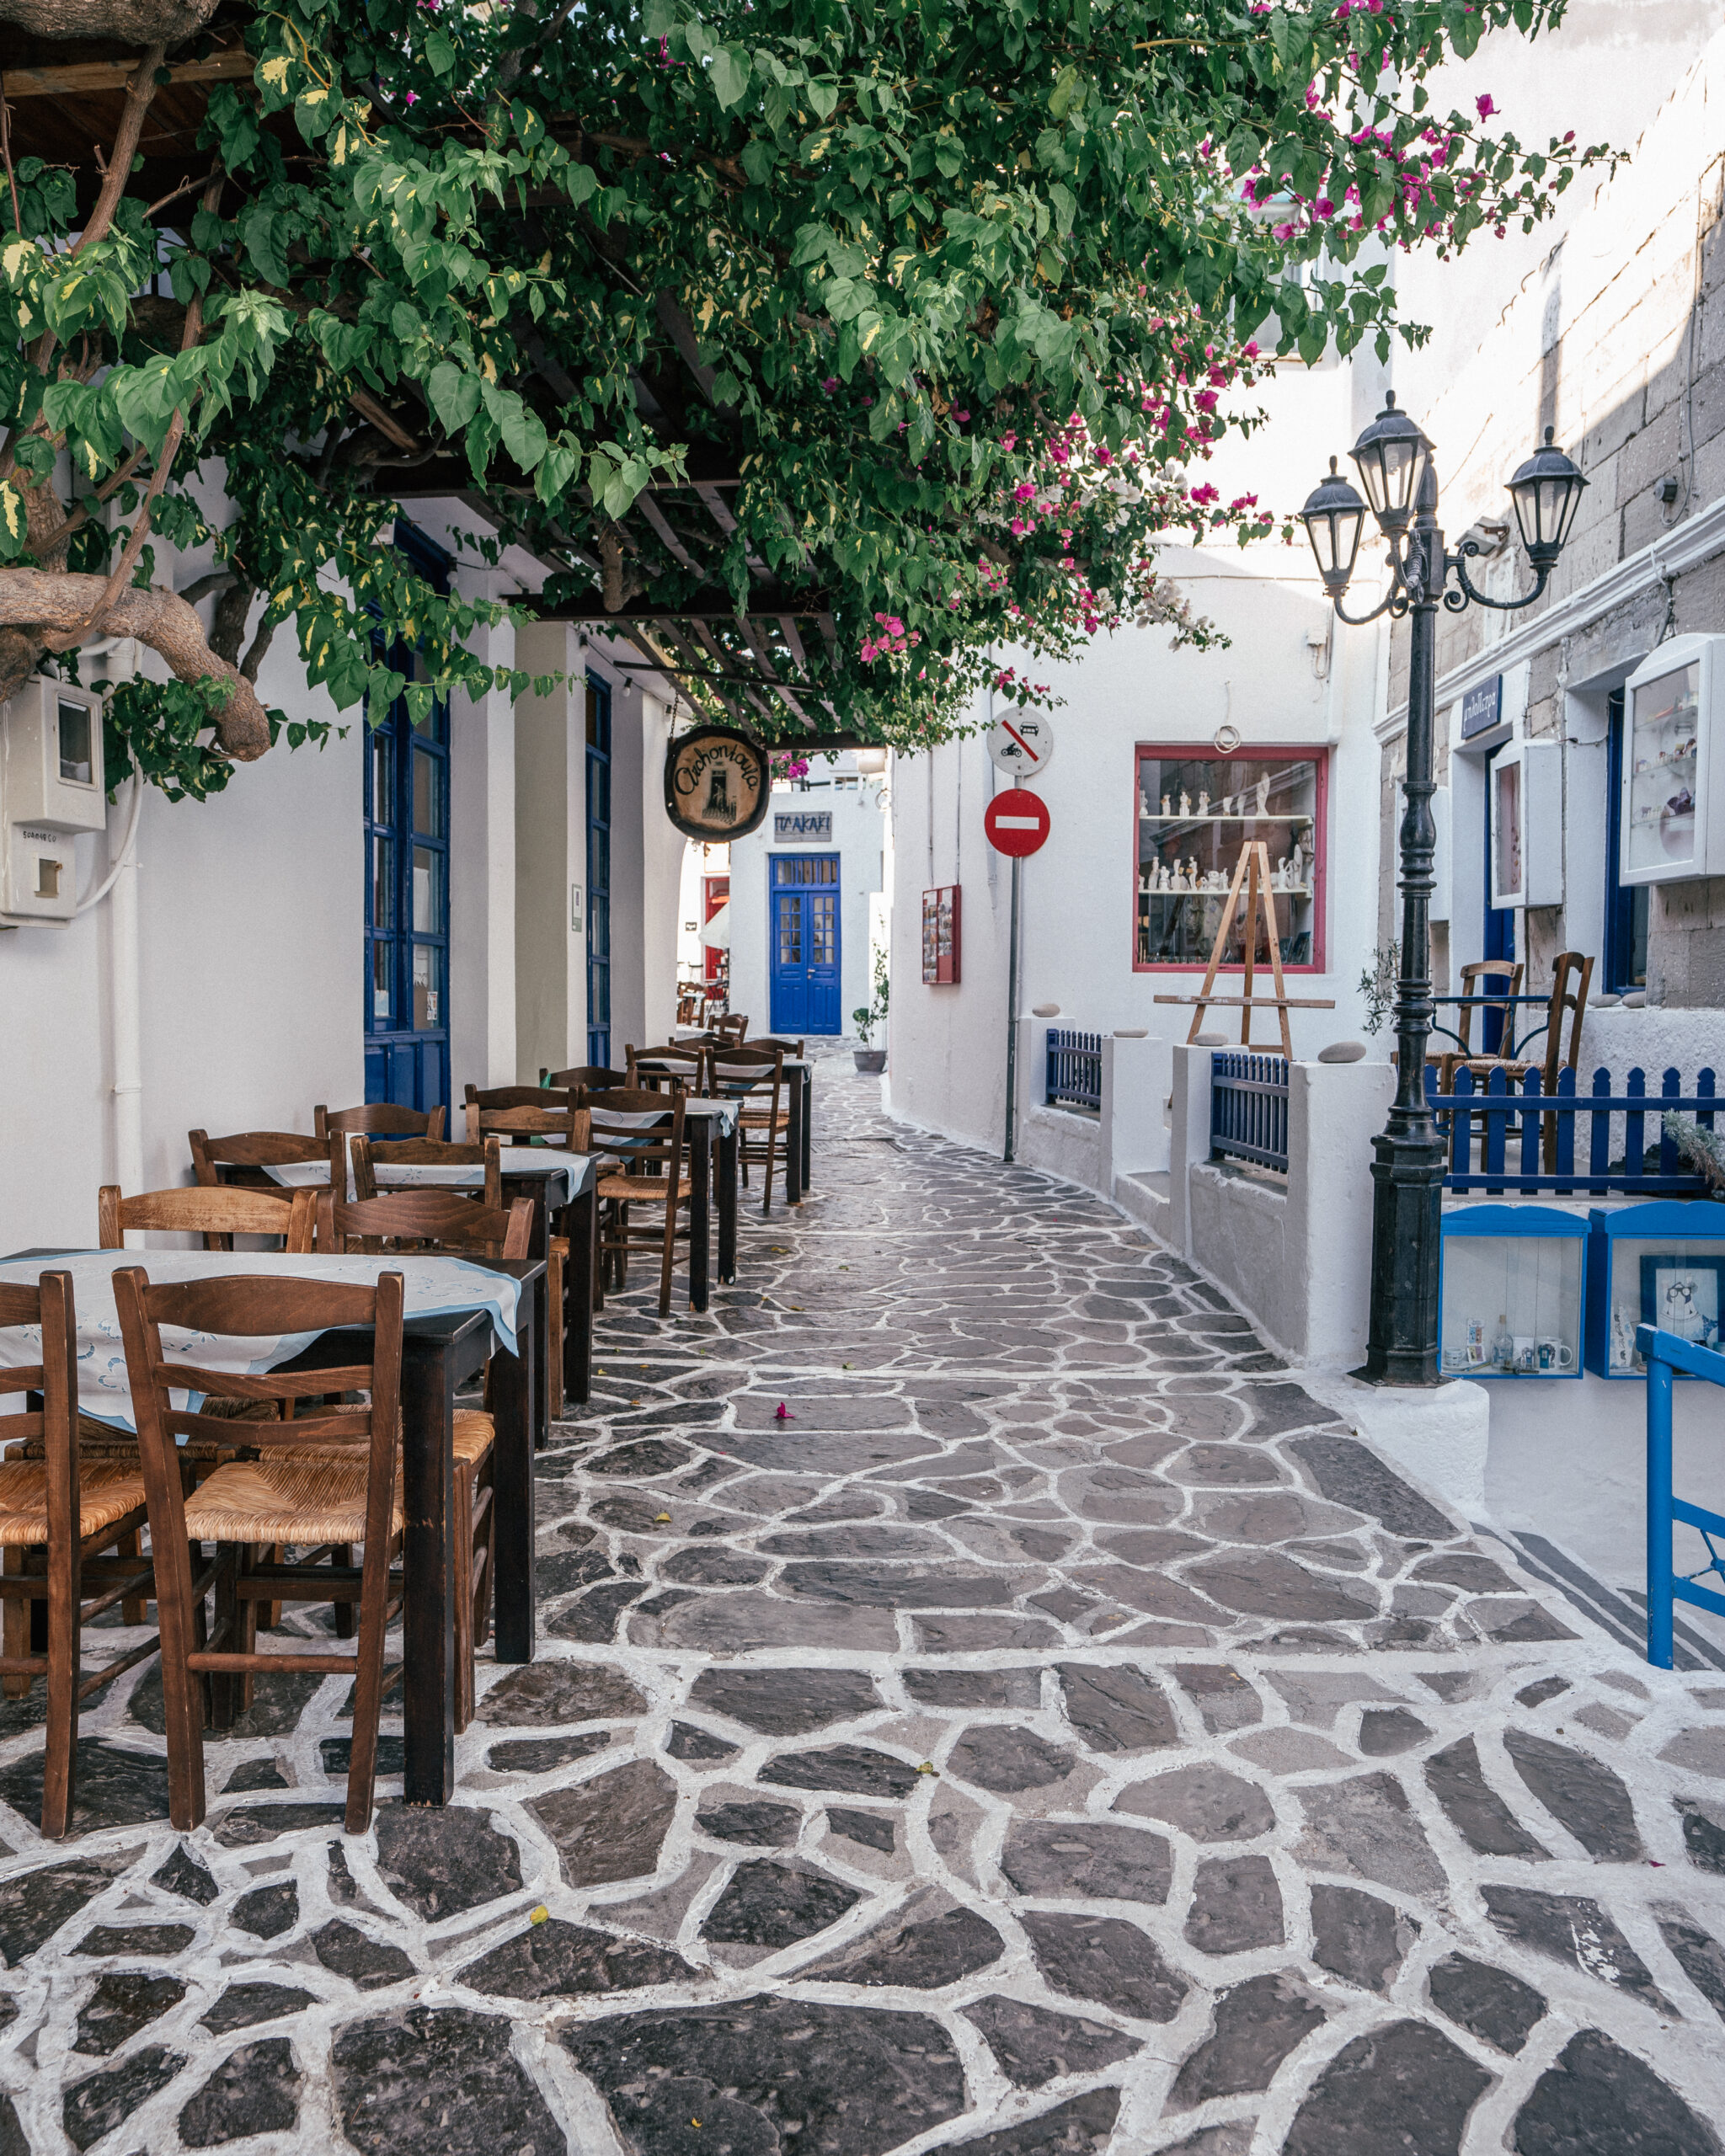 The ultimate travel guide to the Greek island of Milos including the best beaches, villages, restaurants, day trips, hotels, Google Map pins and more.